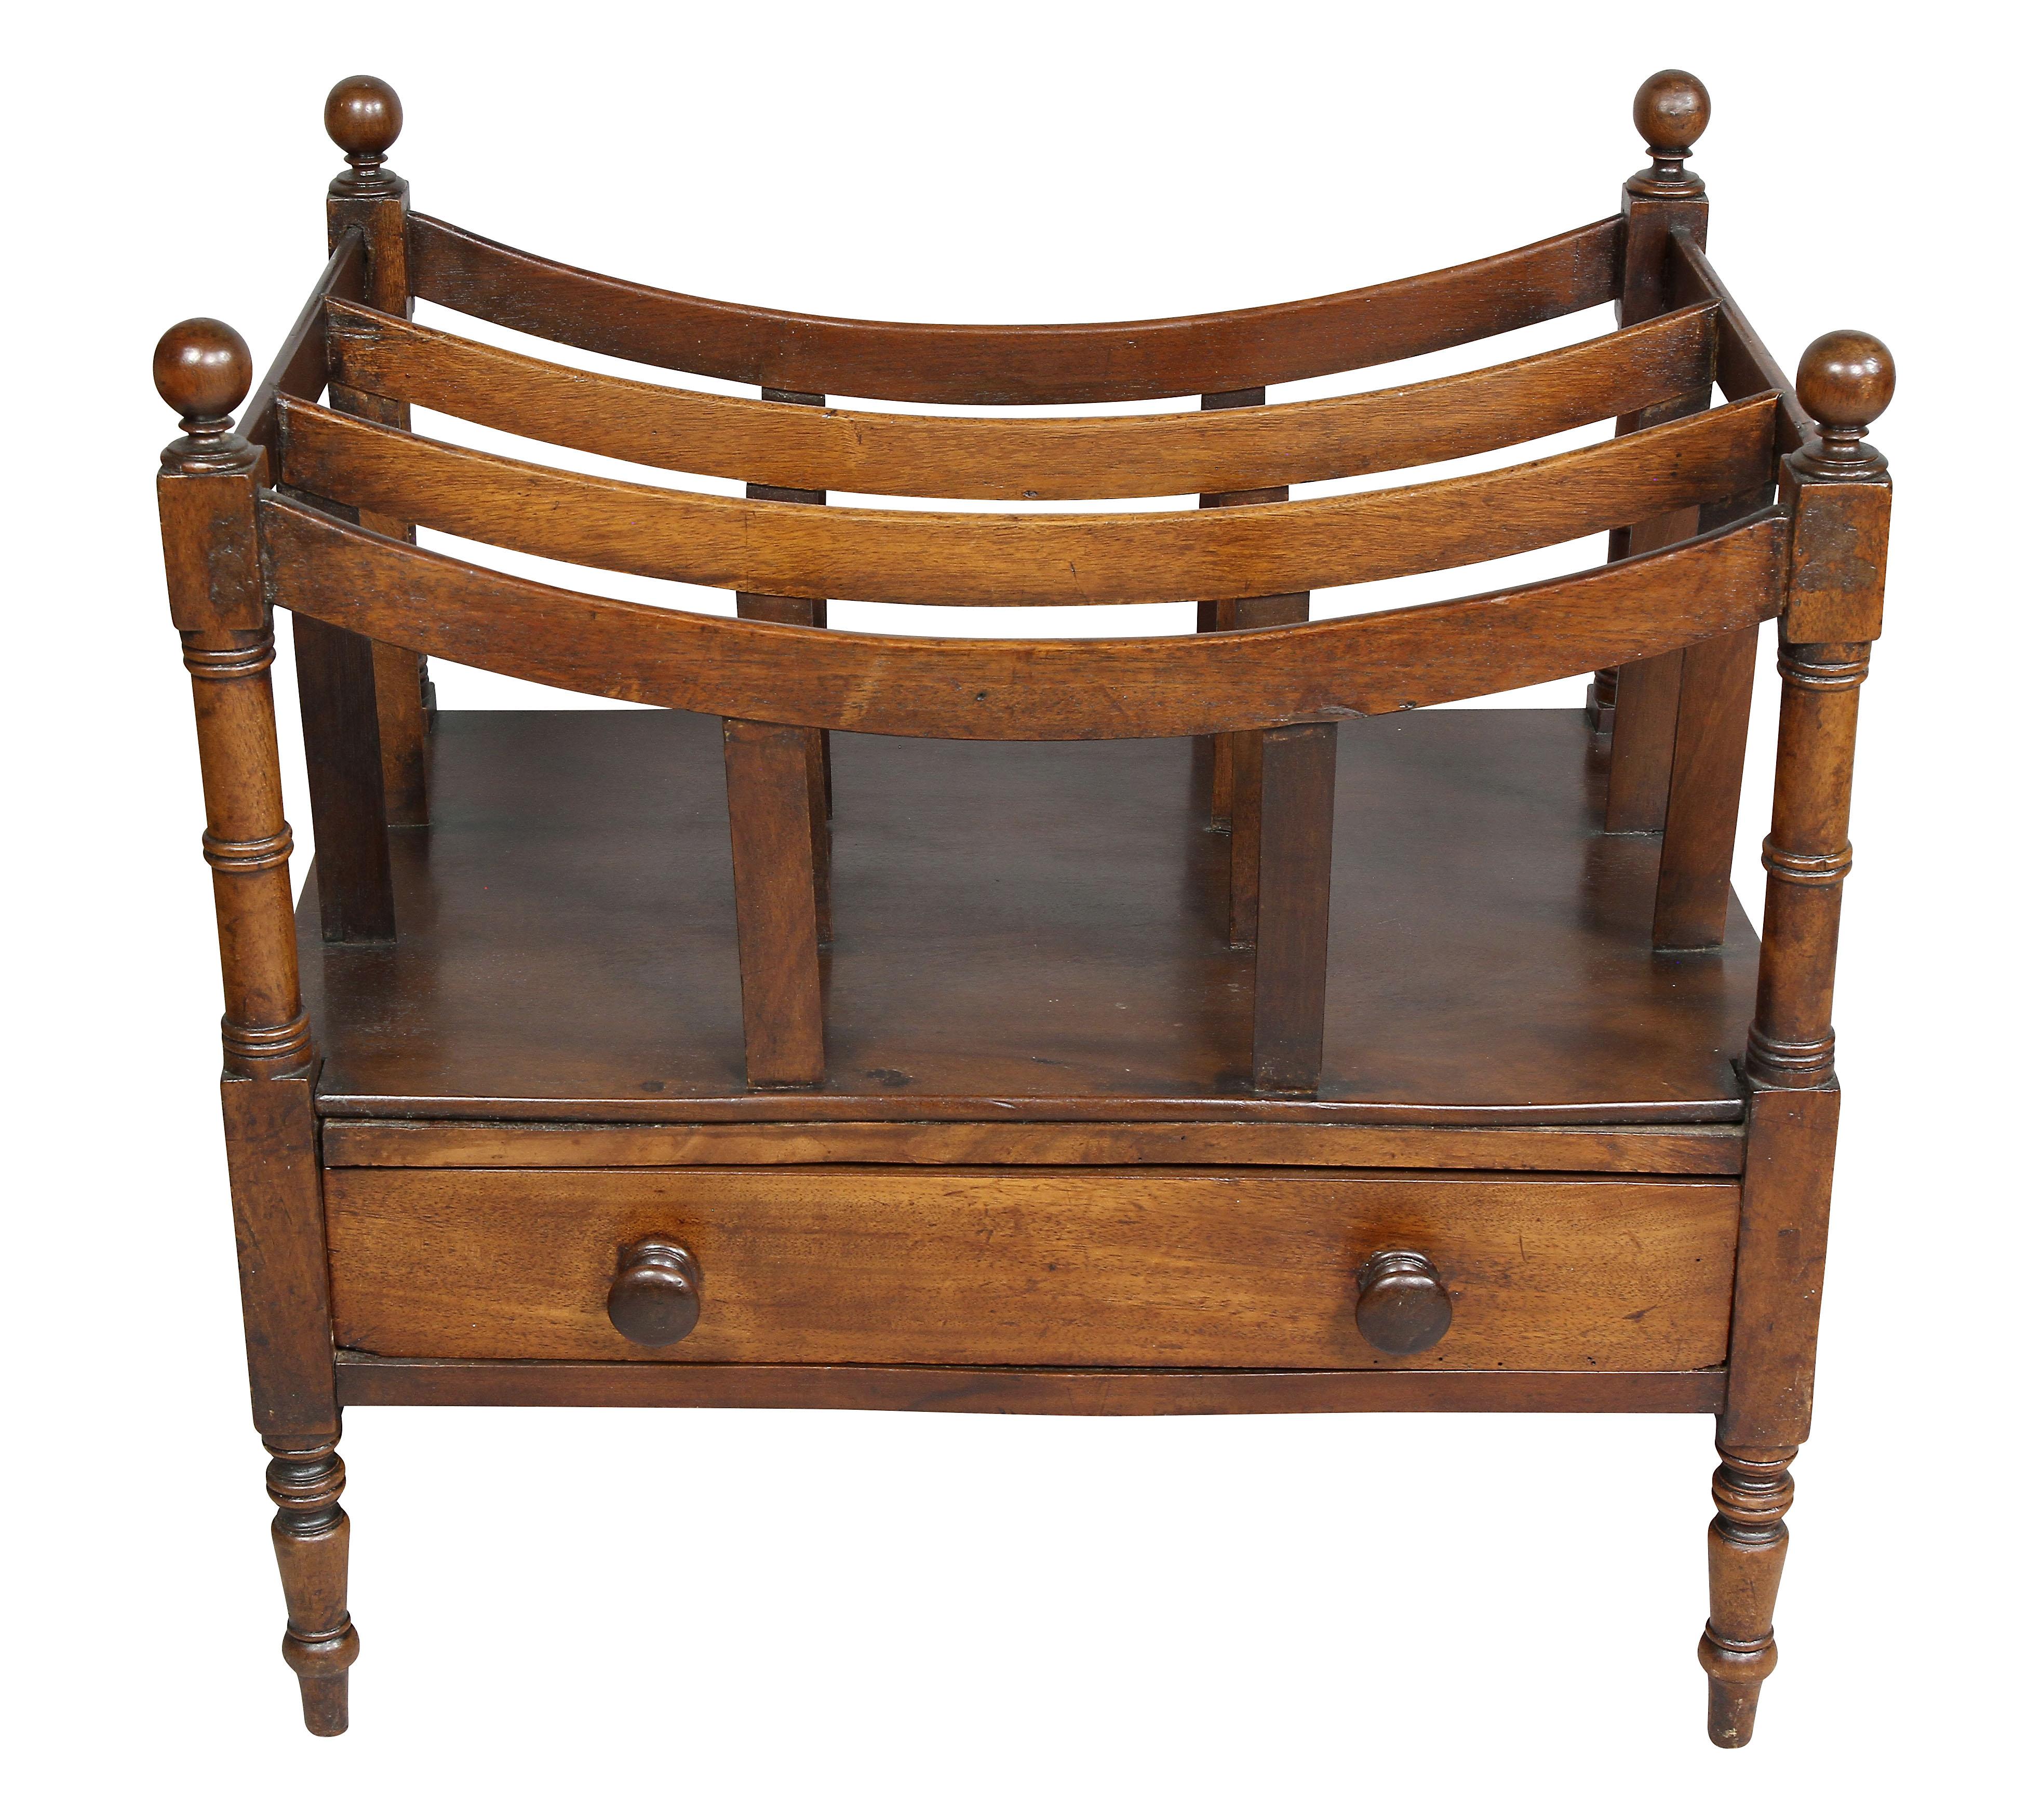 Orb finials and three compartment slats over a drawer with wood knobs, raised on turned legs.